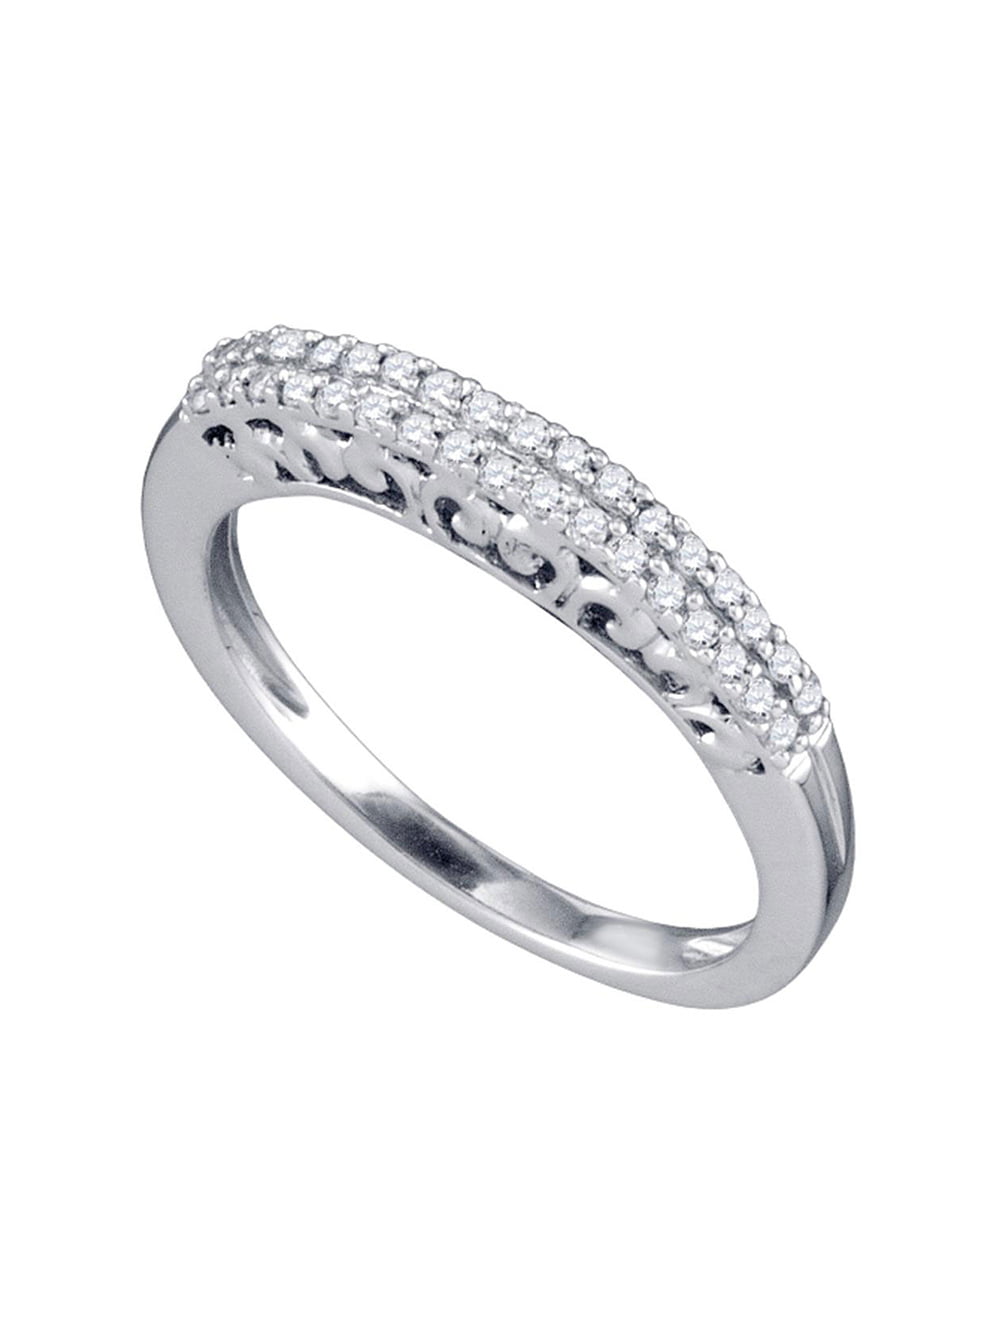 Details about   2.5Ct Round Cut D/VVS1 Diamond Eternity Wedding Band Ring 14K White Gold Finish 